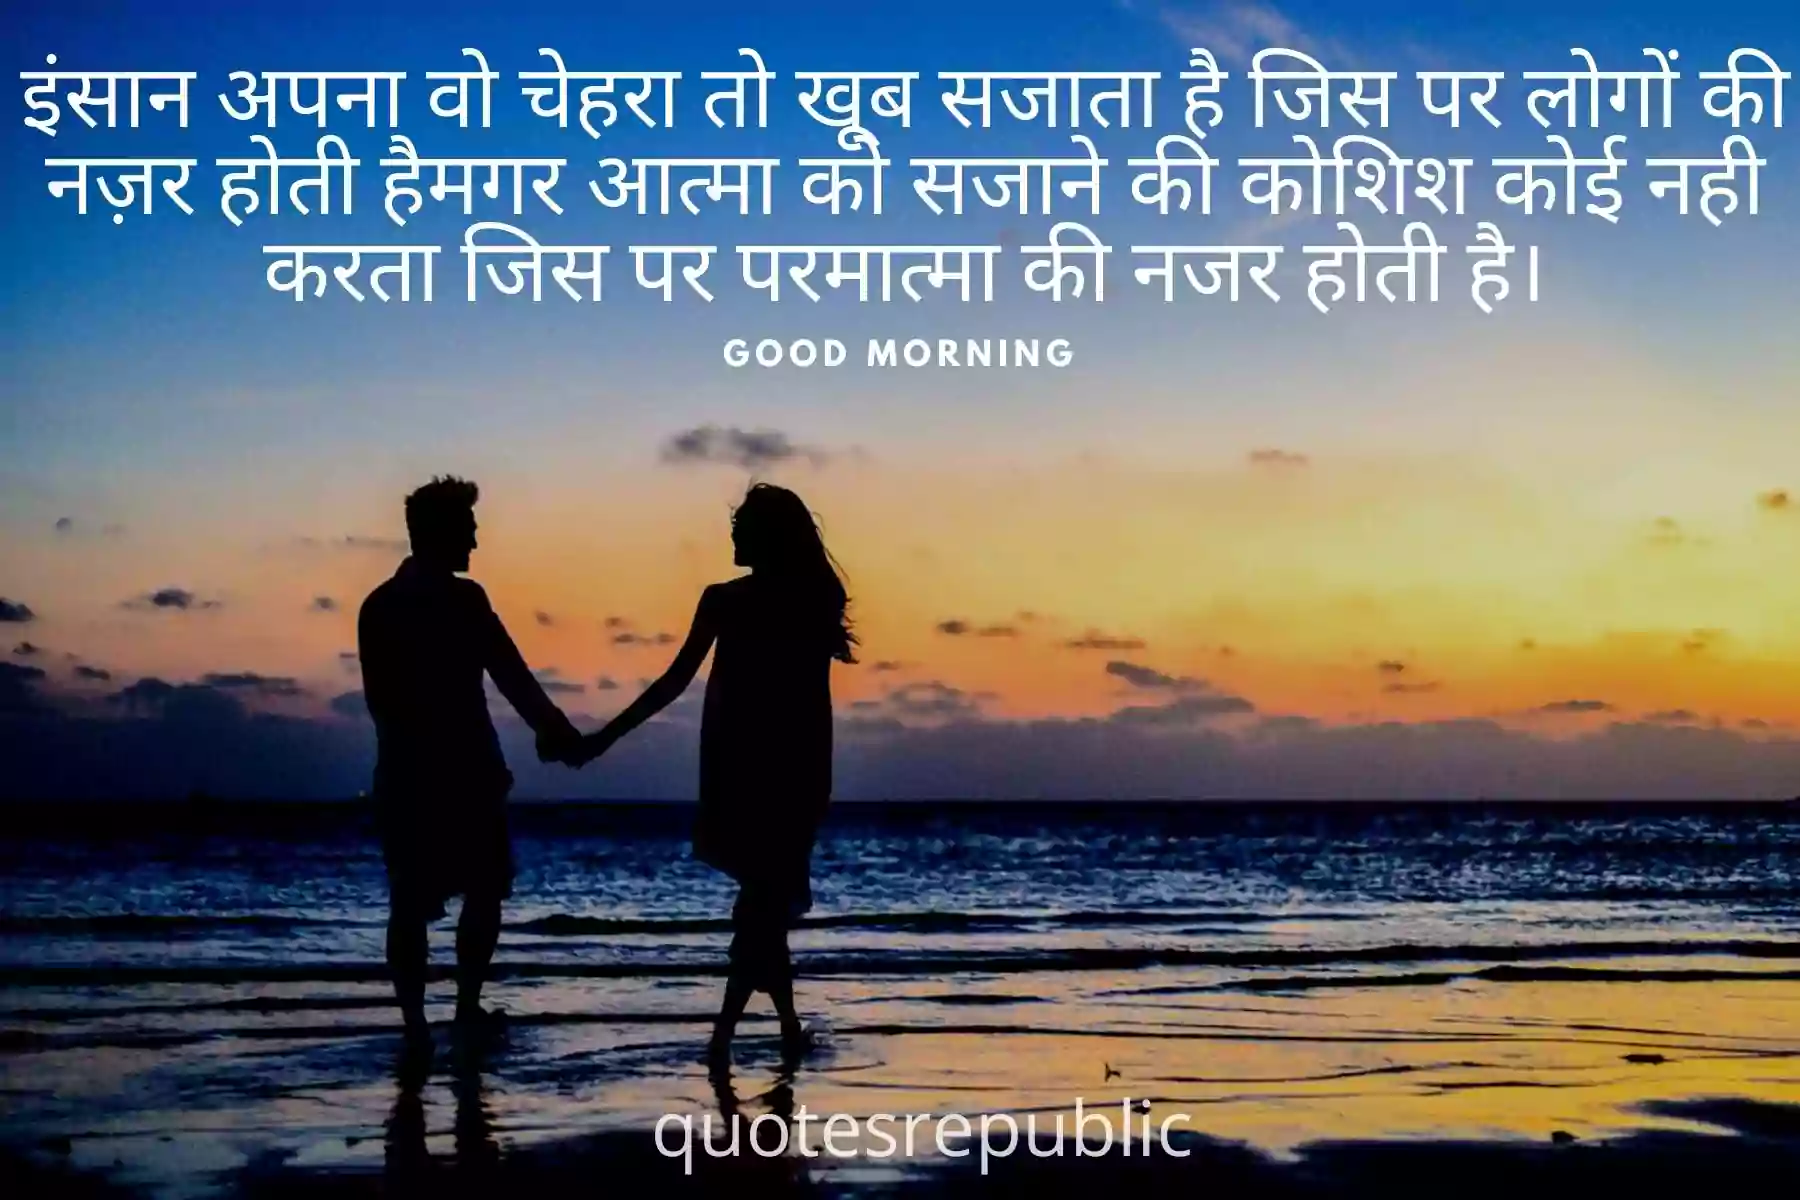 Motivational Quotes In Hindi Good Morning